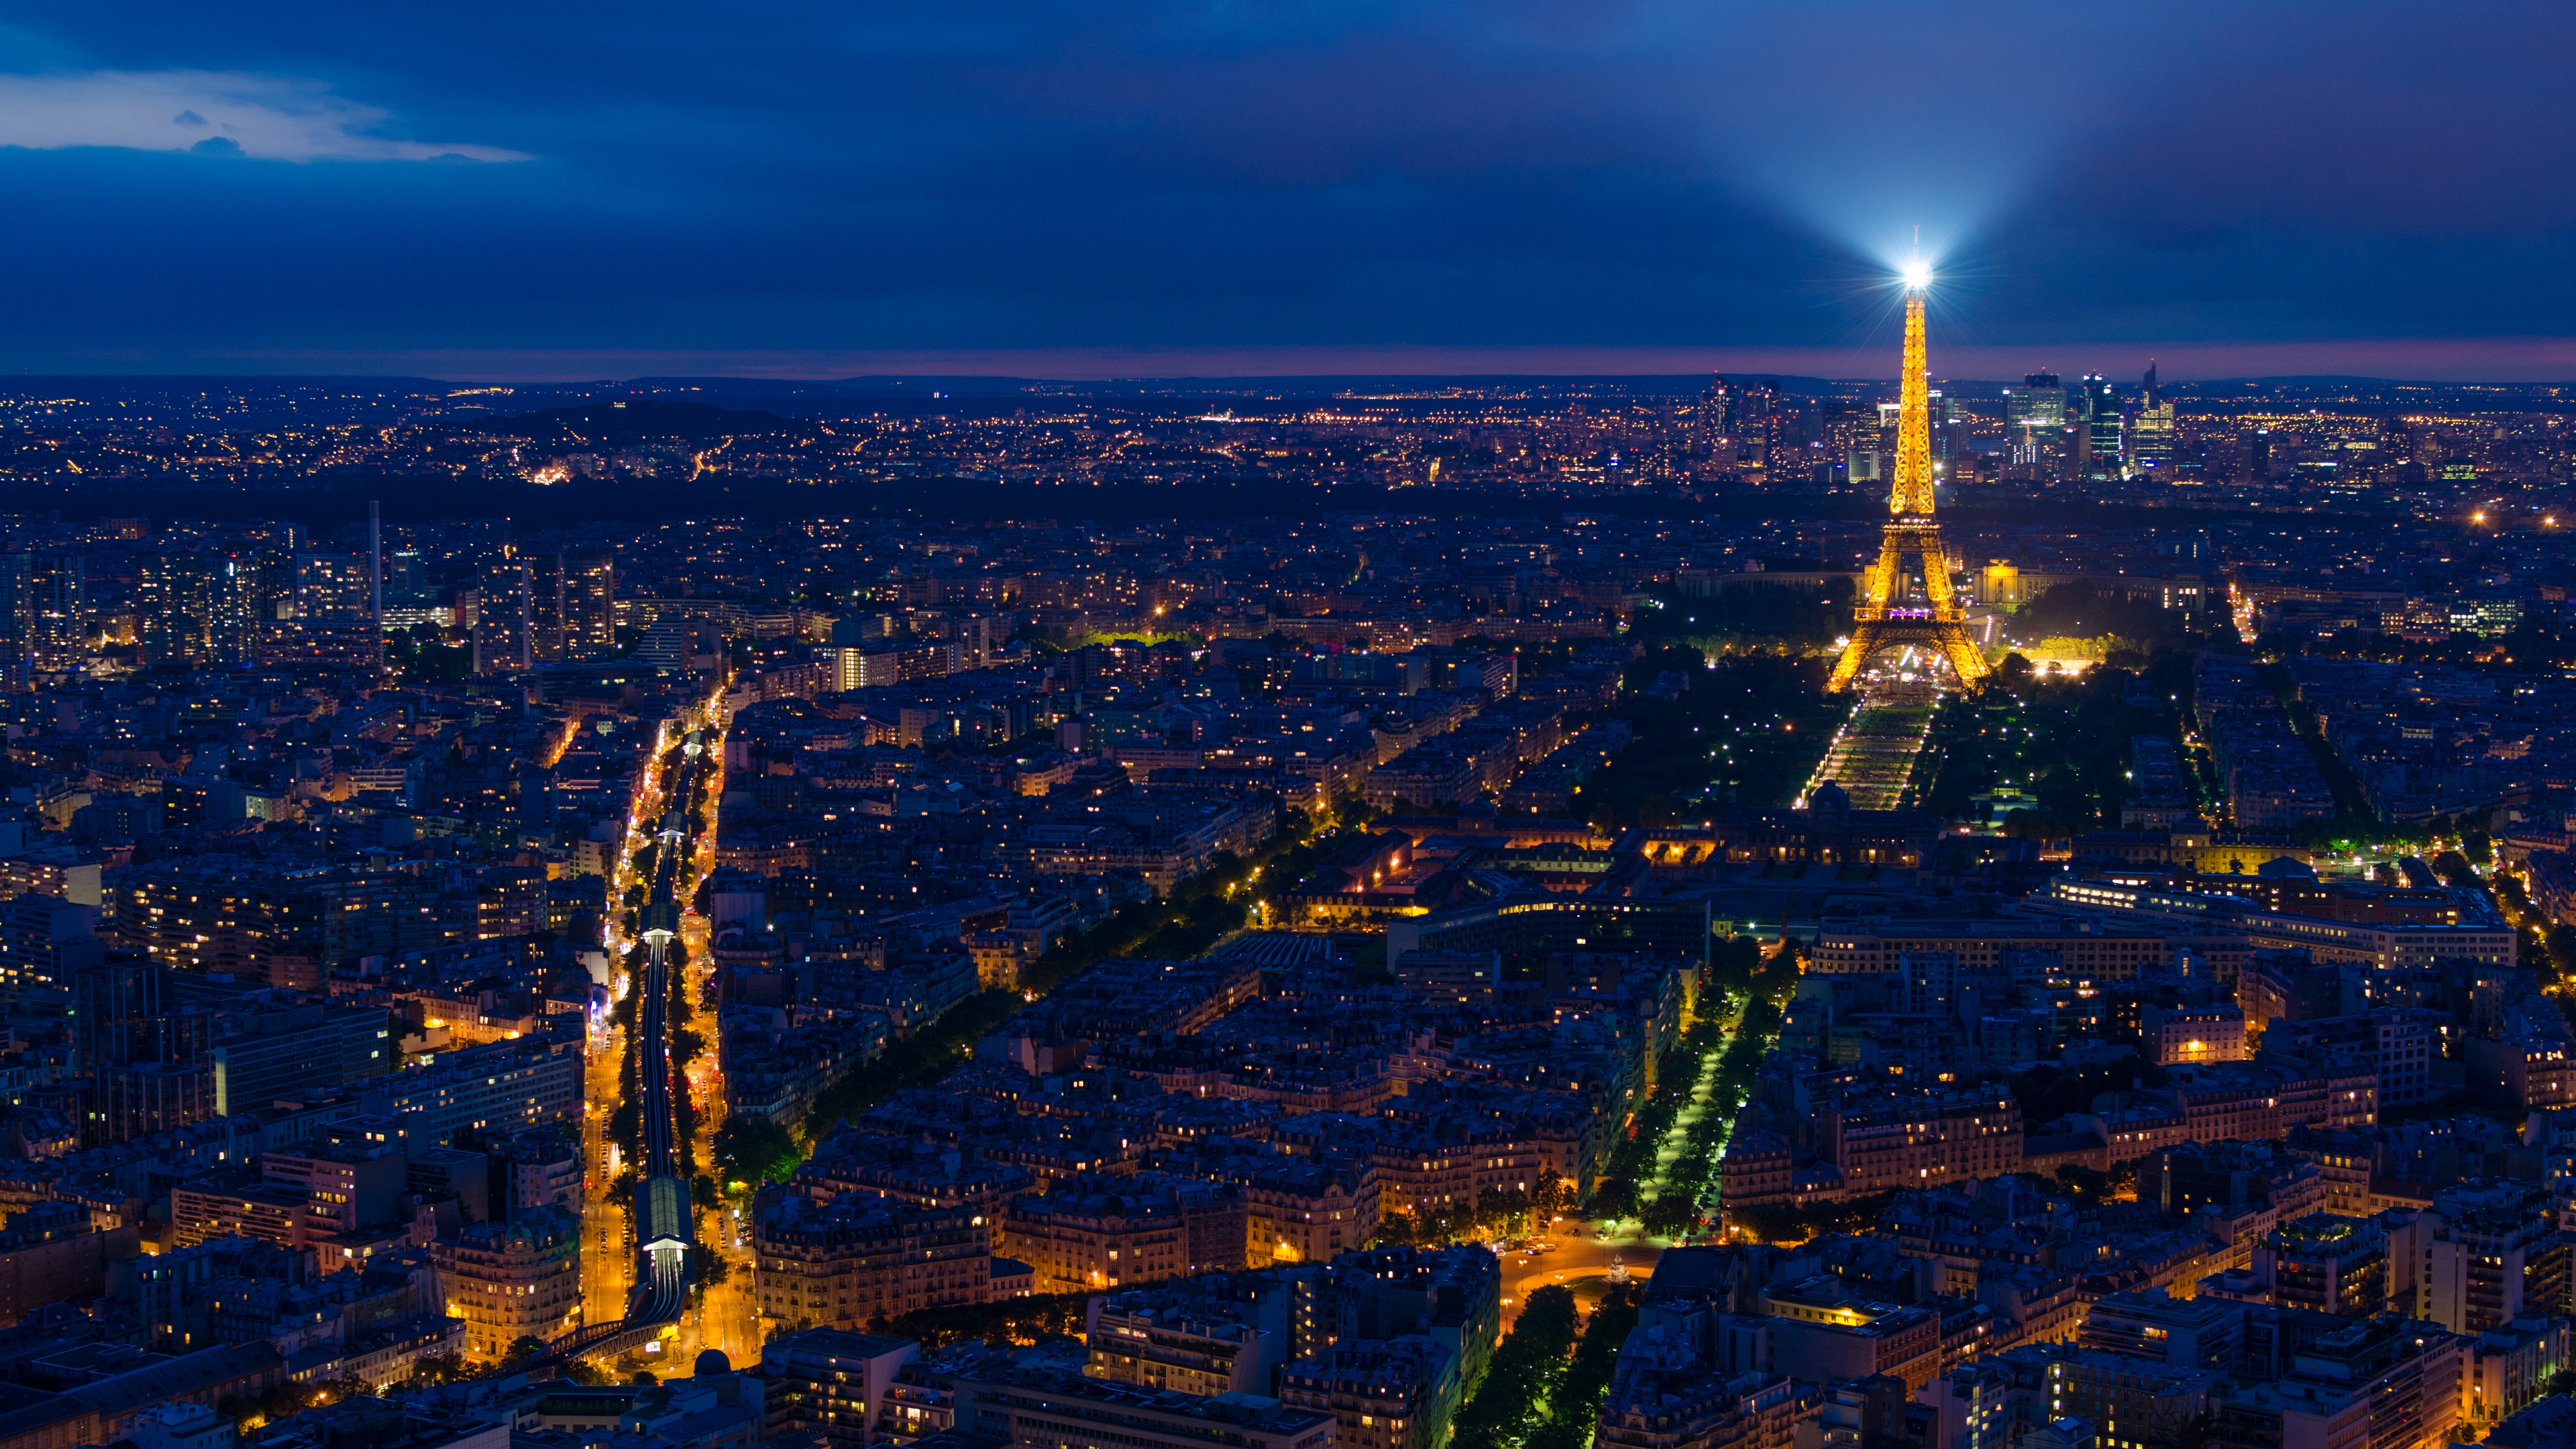 Eiffel Tower At Night Photos Download The BEST Free Eiffel Tower At Night  Stock Photos  HD Images